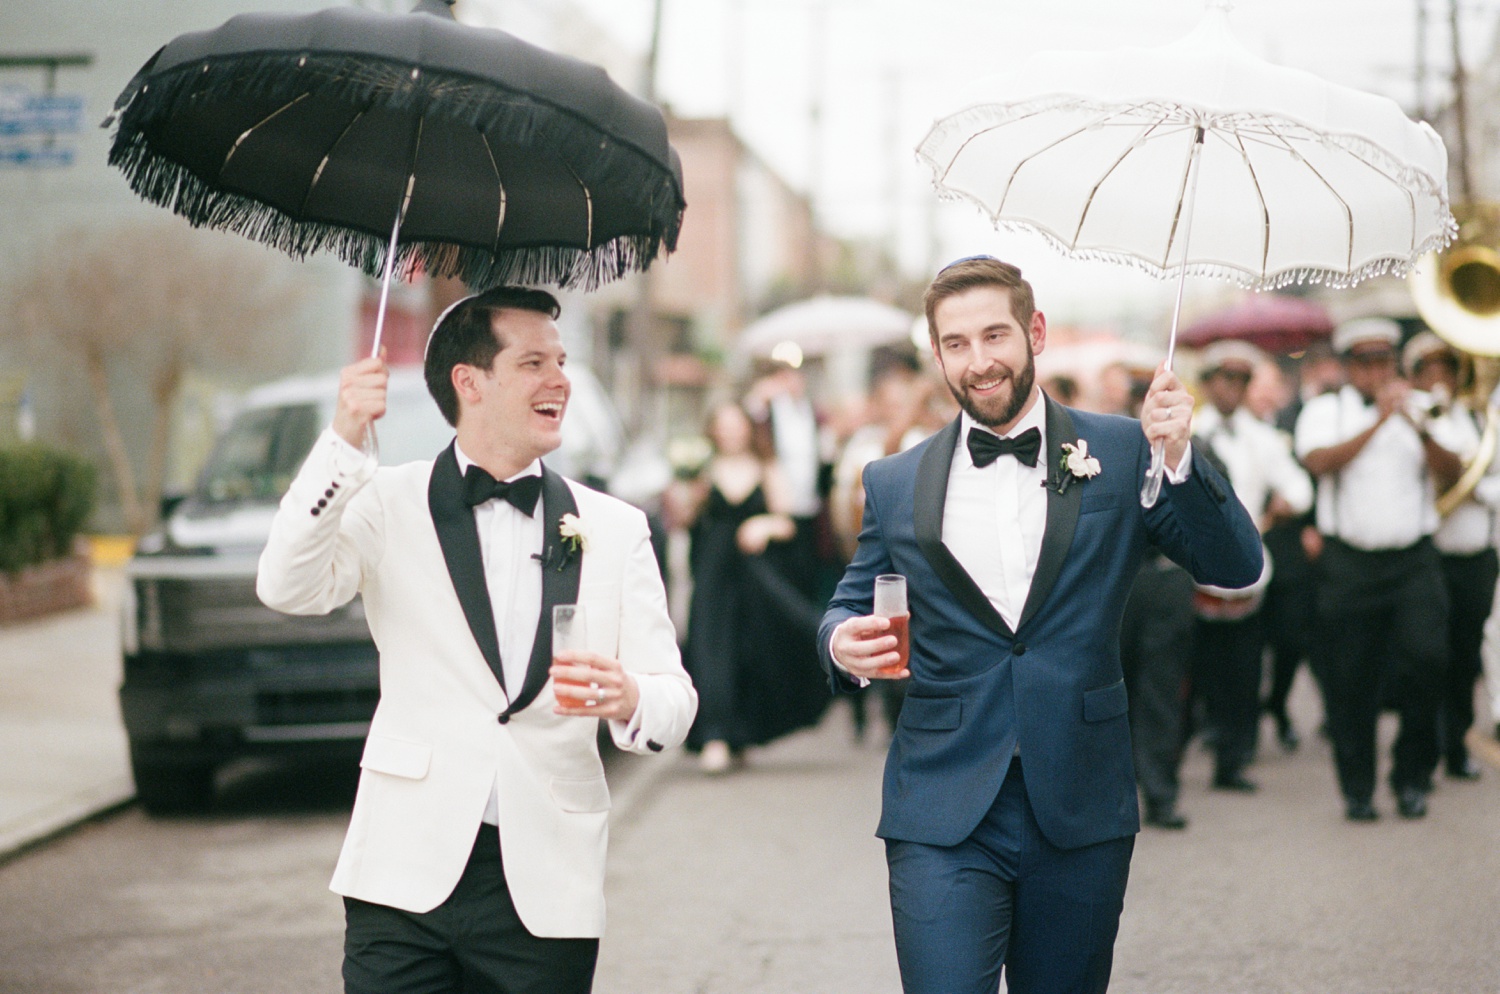 Two grooms carrying New Orleans wedding umbrellas lead a wedding second line through the French Quarter.